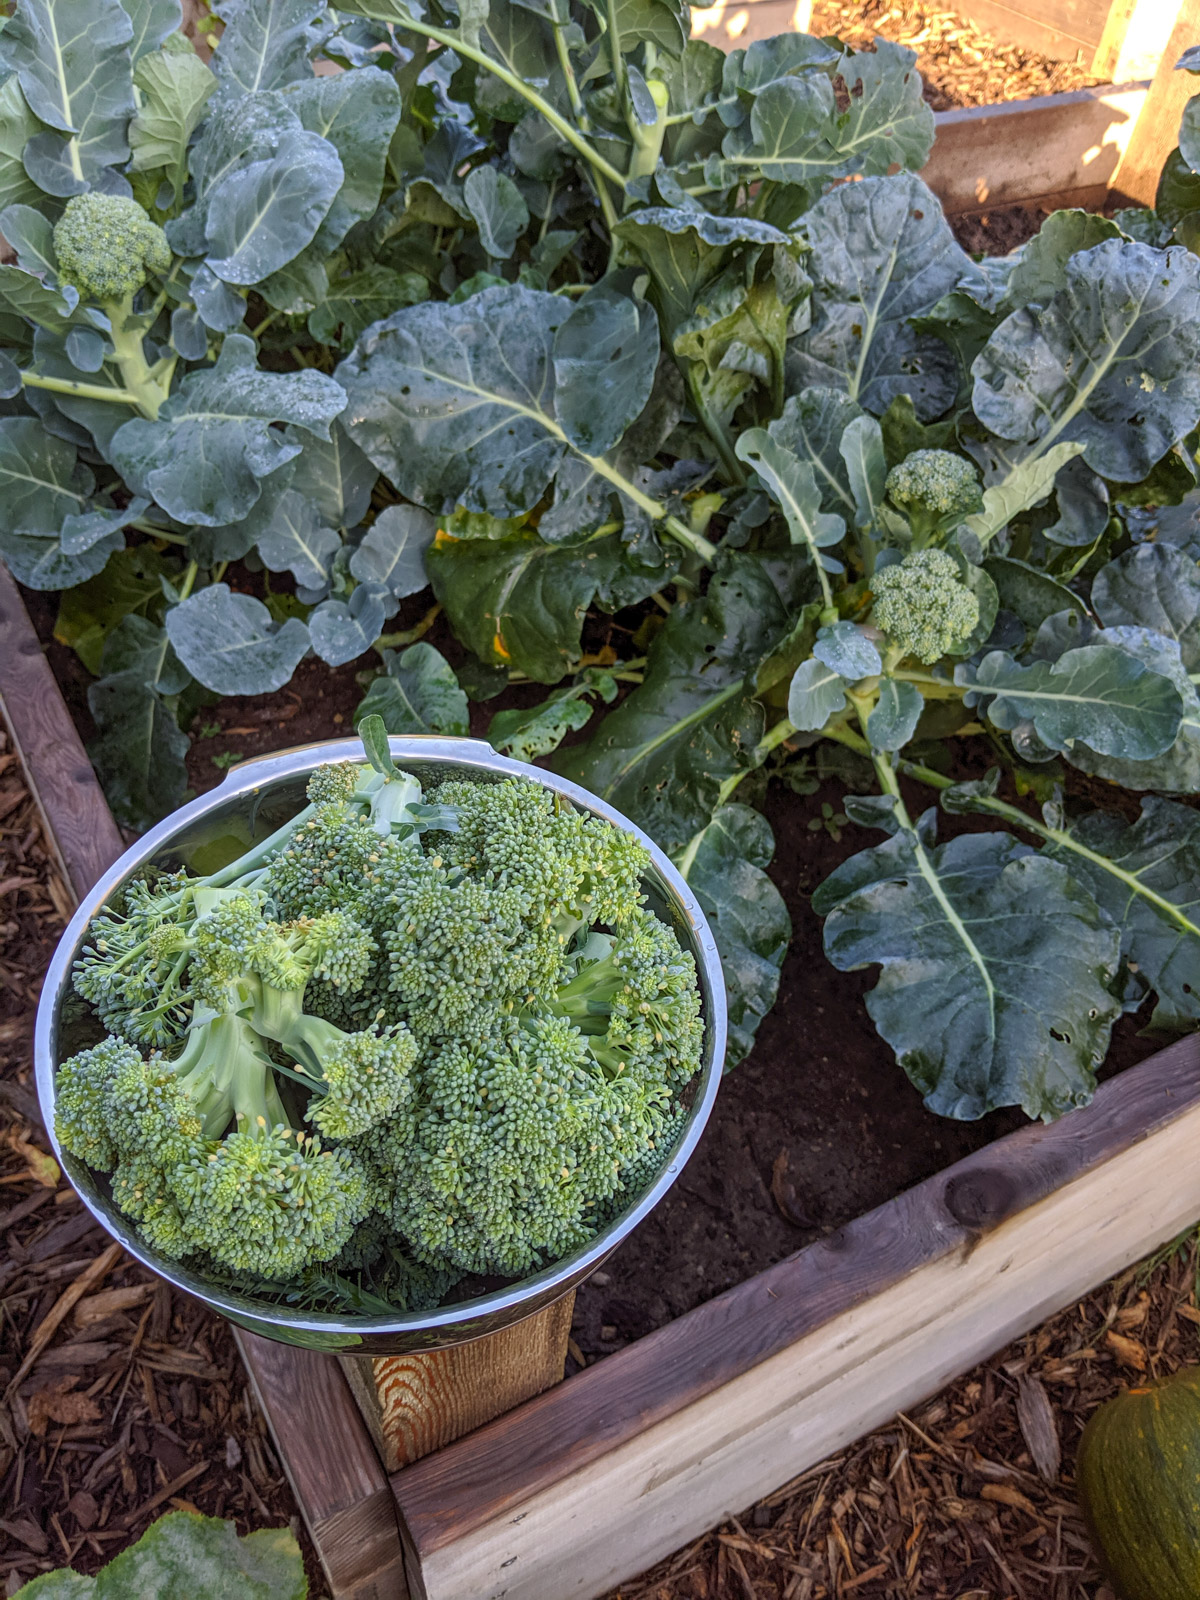 Broccoli plants with a bowl of harvested broccoli.